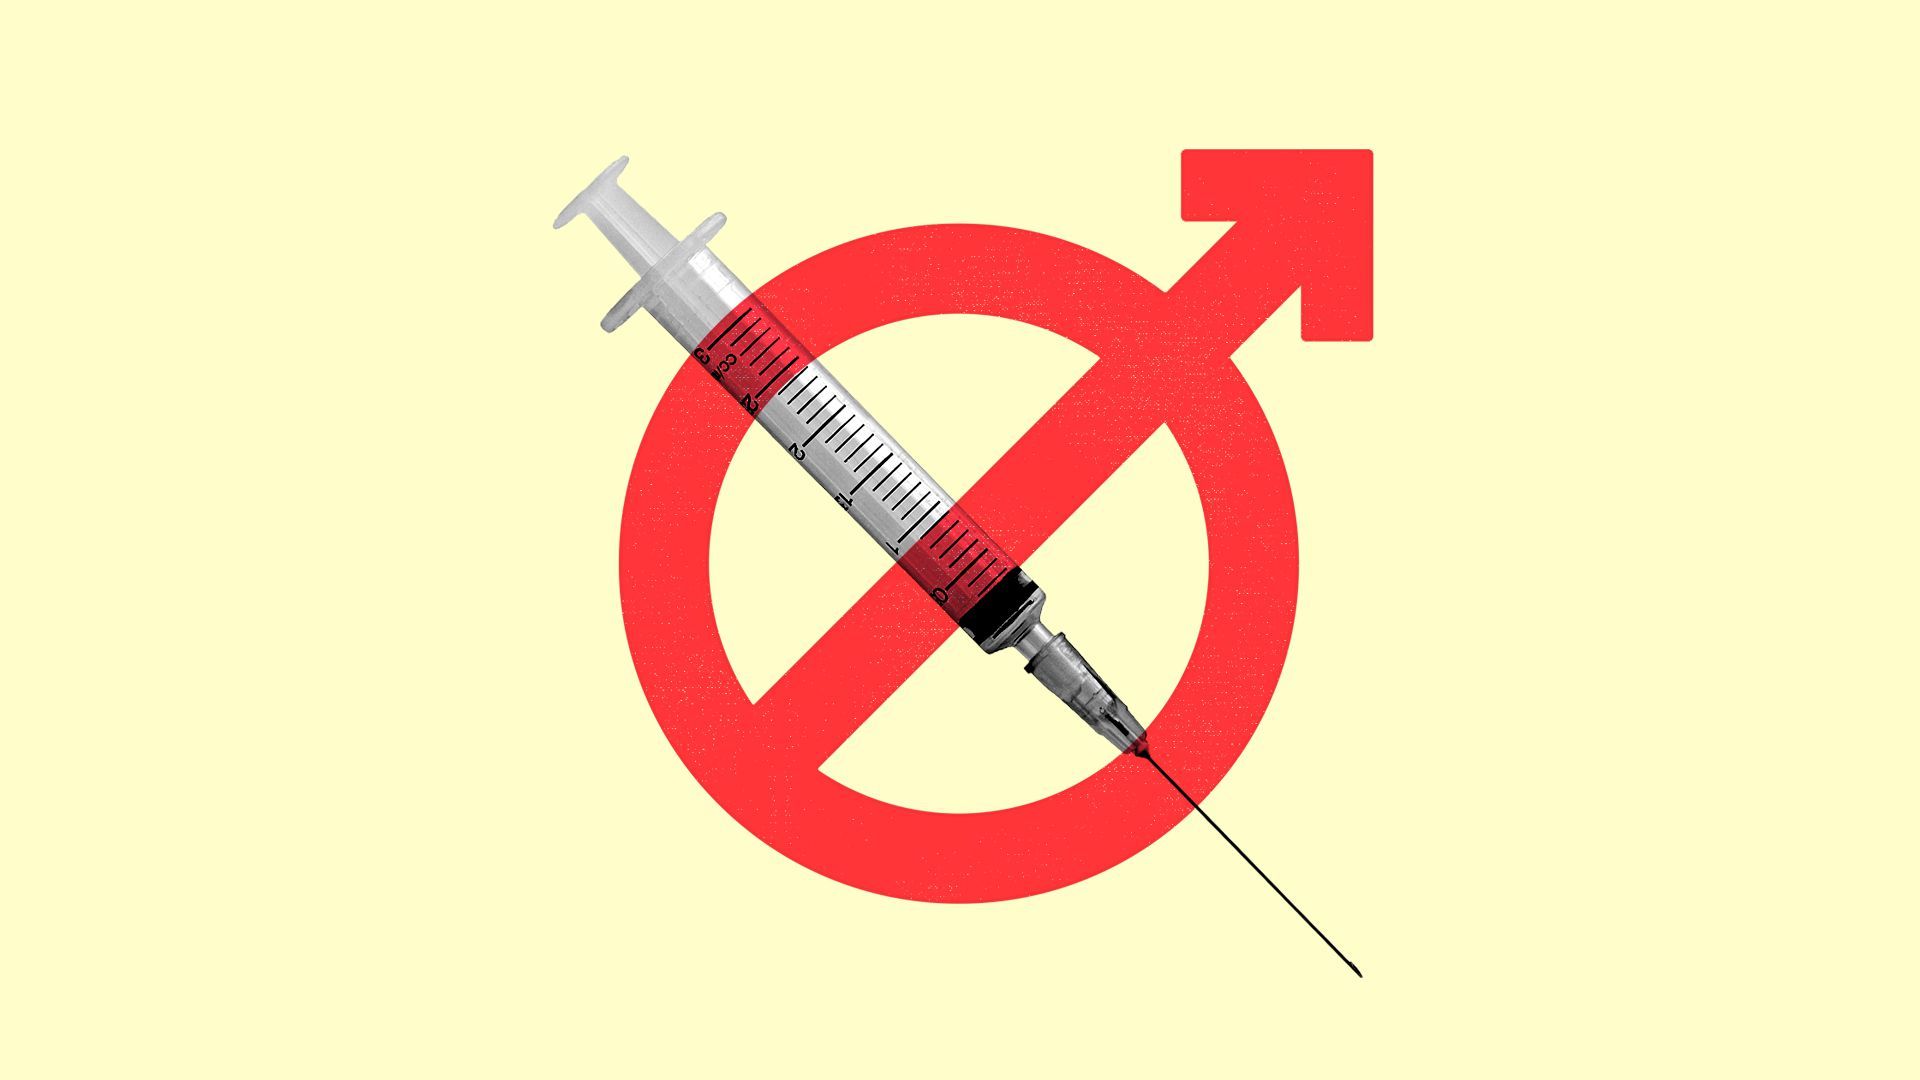 Illustration of a syringe with a combination no smoking sign and male symbol over it.